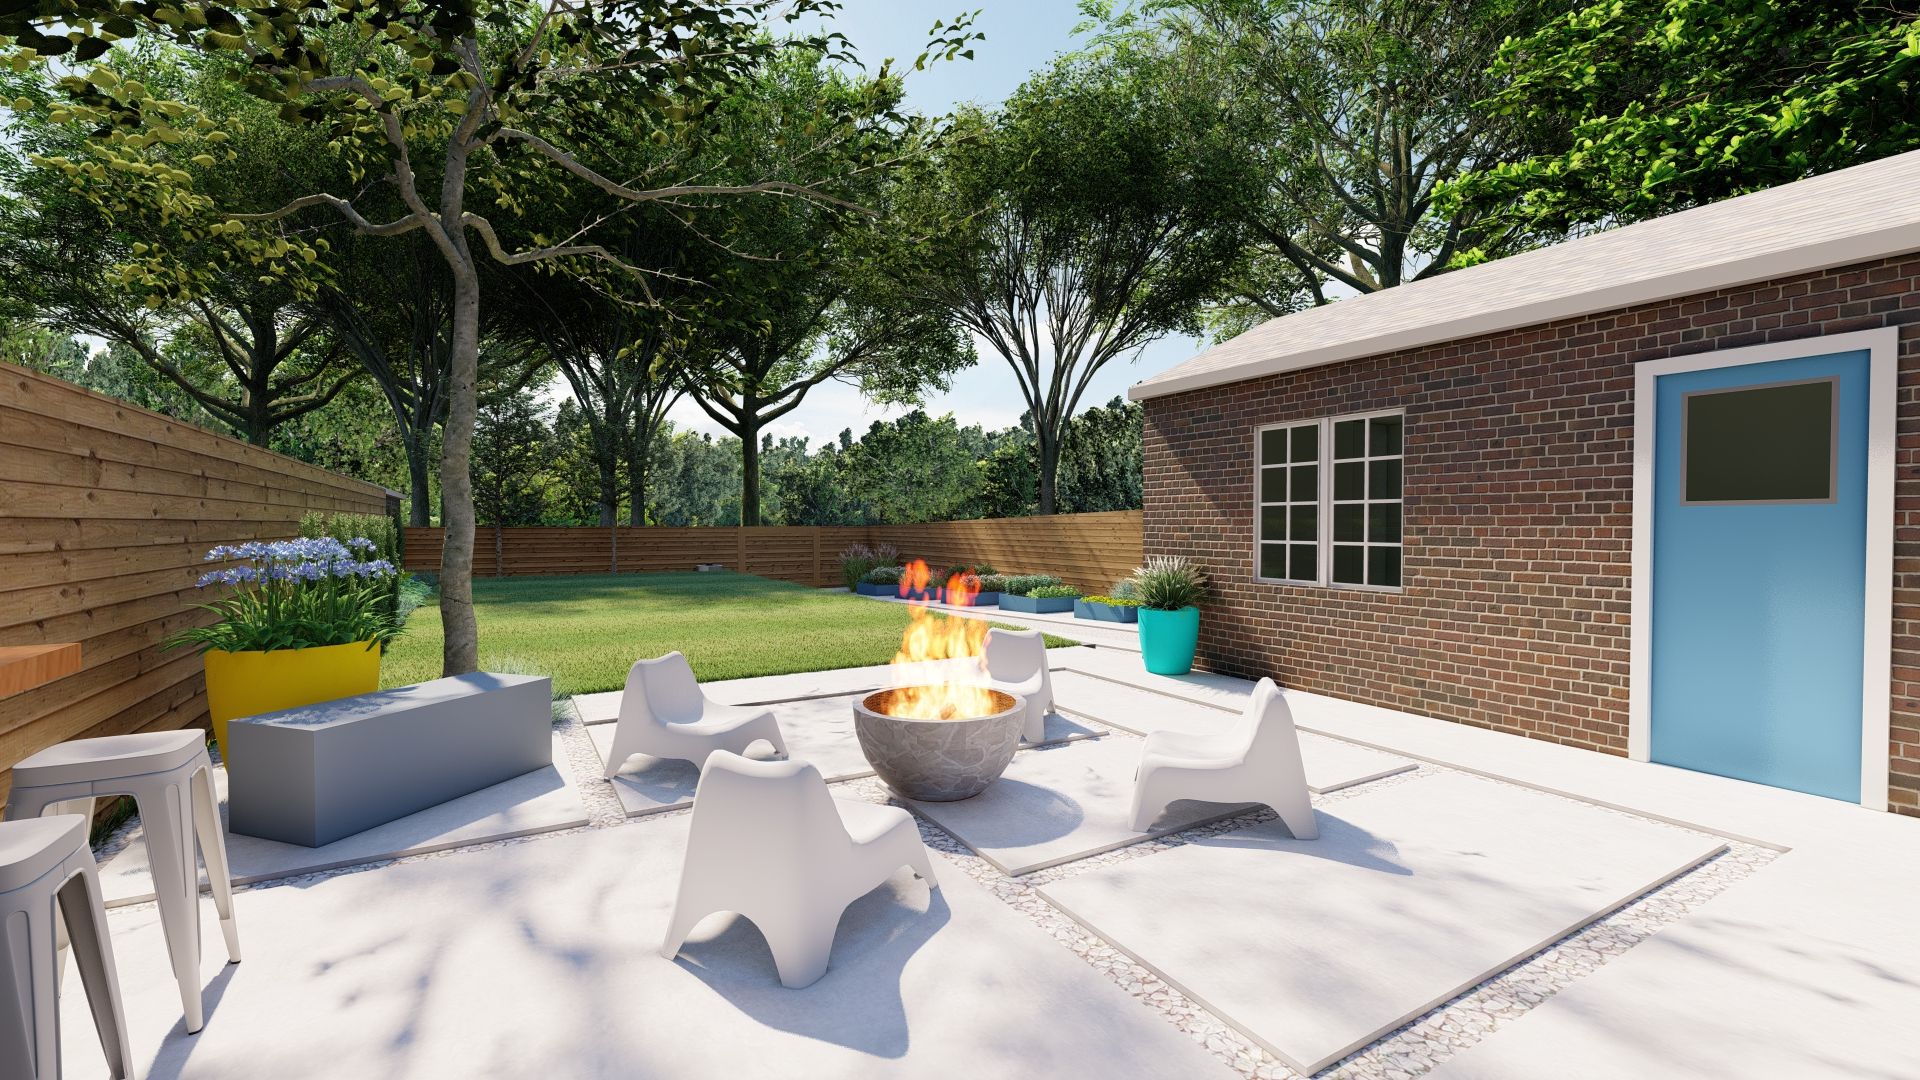 small backyard landscaping ideas in Denver with a large paver patio and fire pit area 